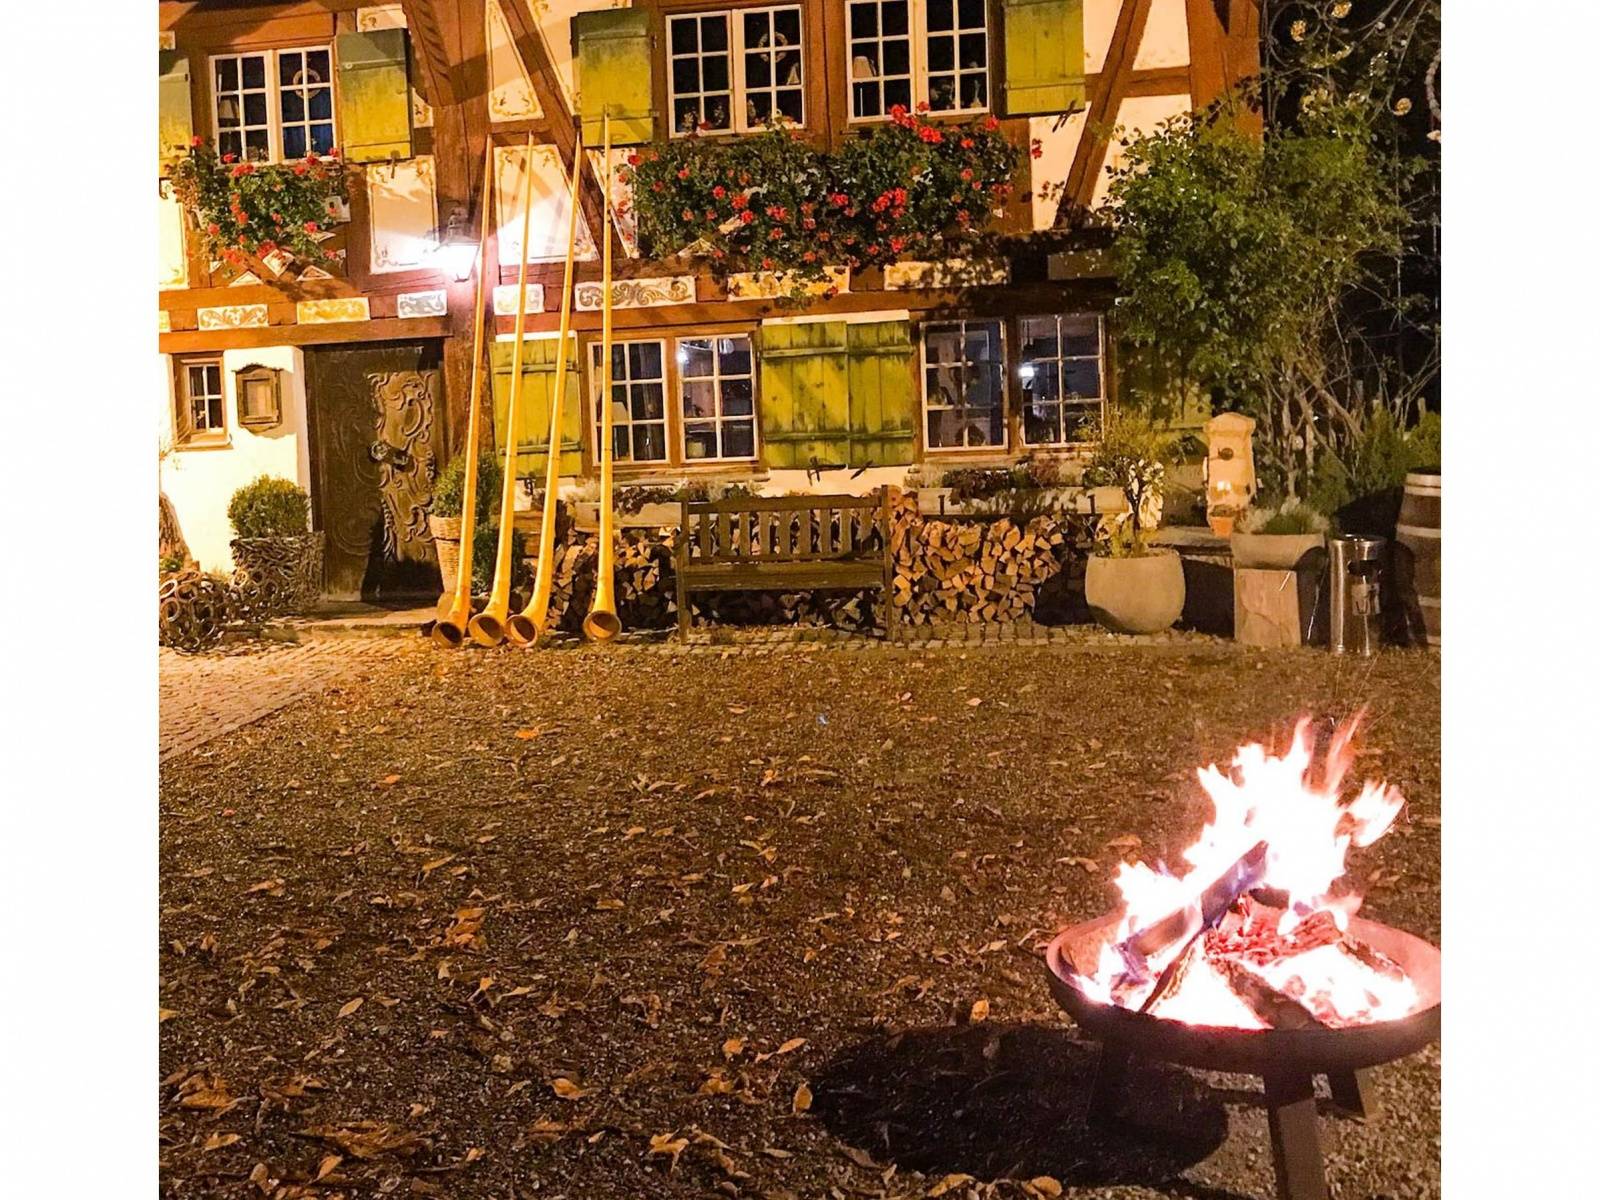 Traditional location for the bavarian event